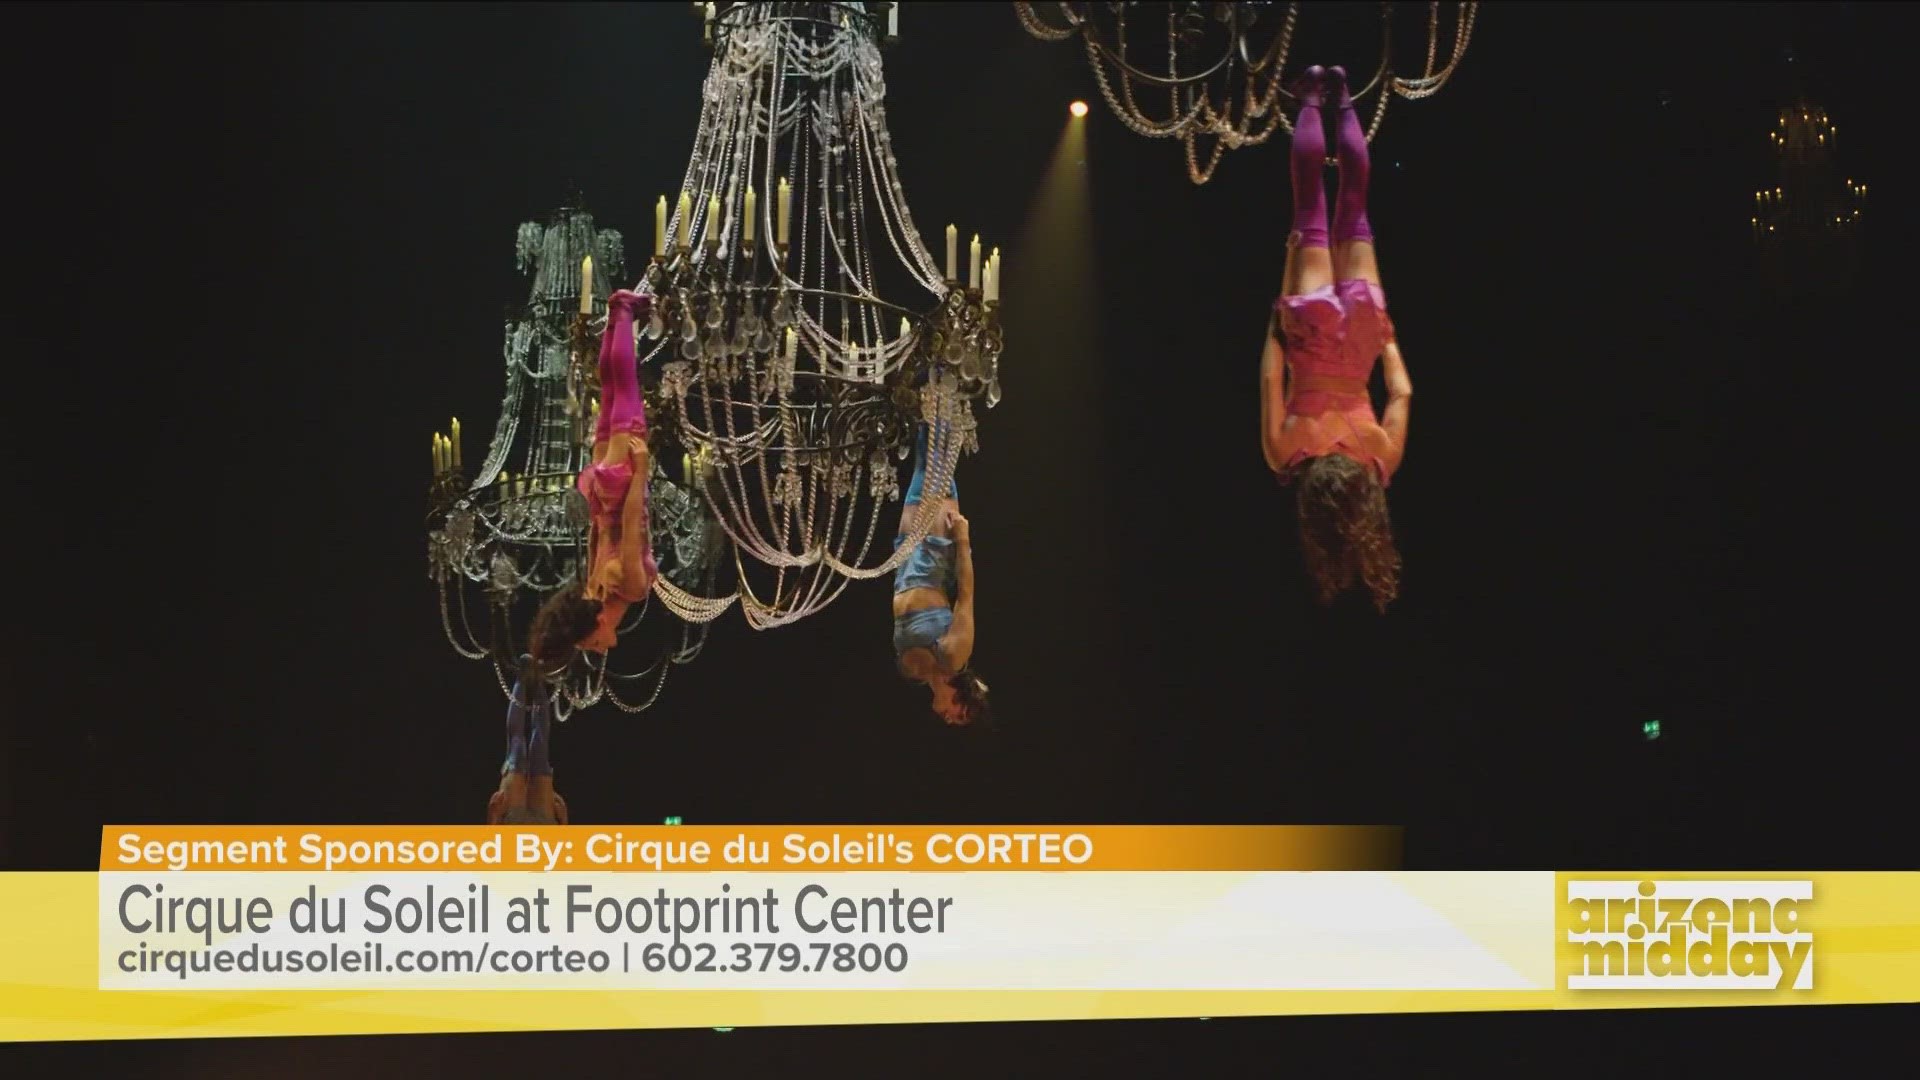 Two performers share how Cirque du Soleil is finally back in North America after a three year hiatus, and is opening their show CORTEO tonight at Footprint Center.